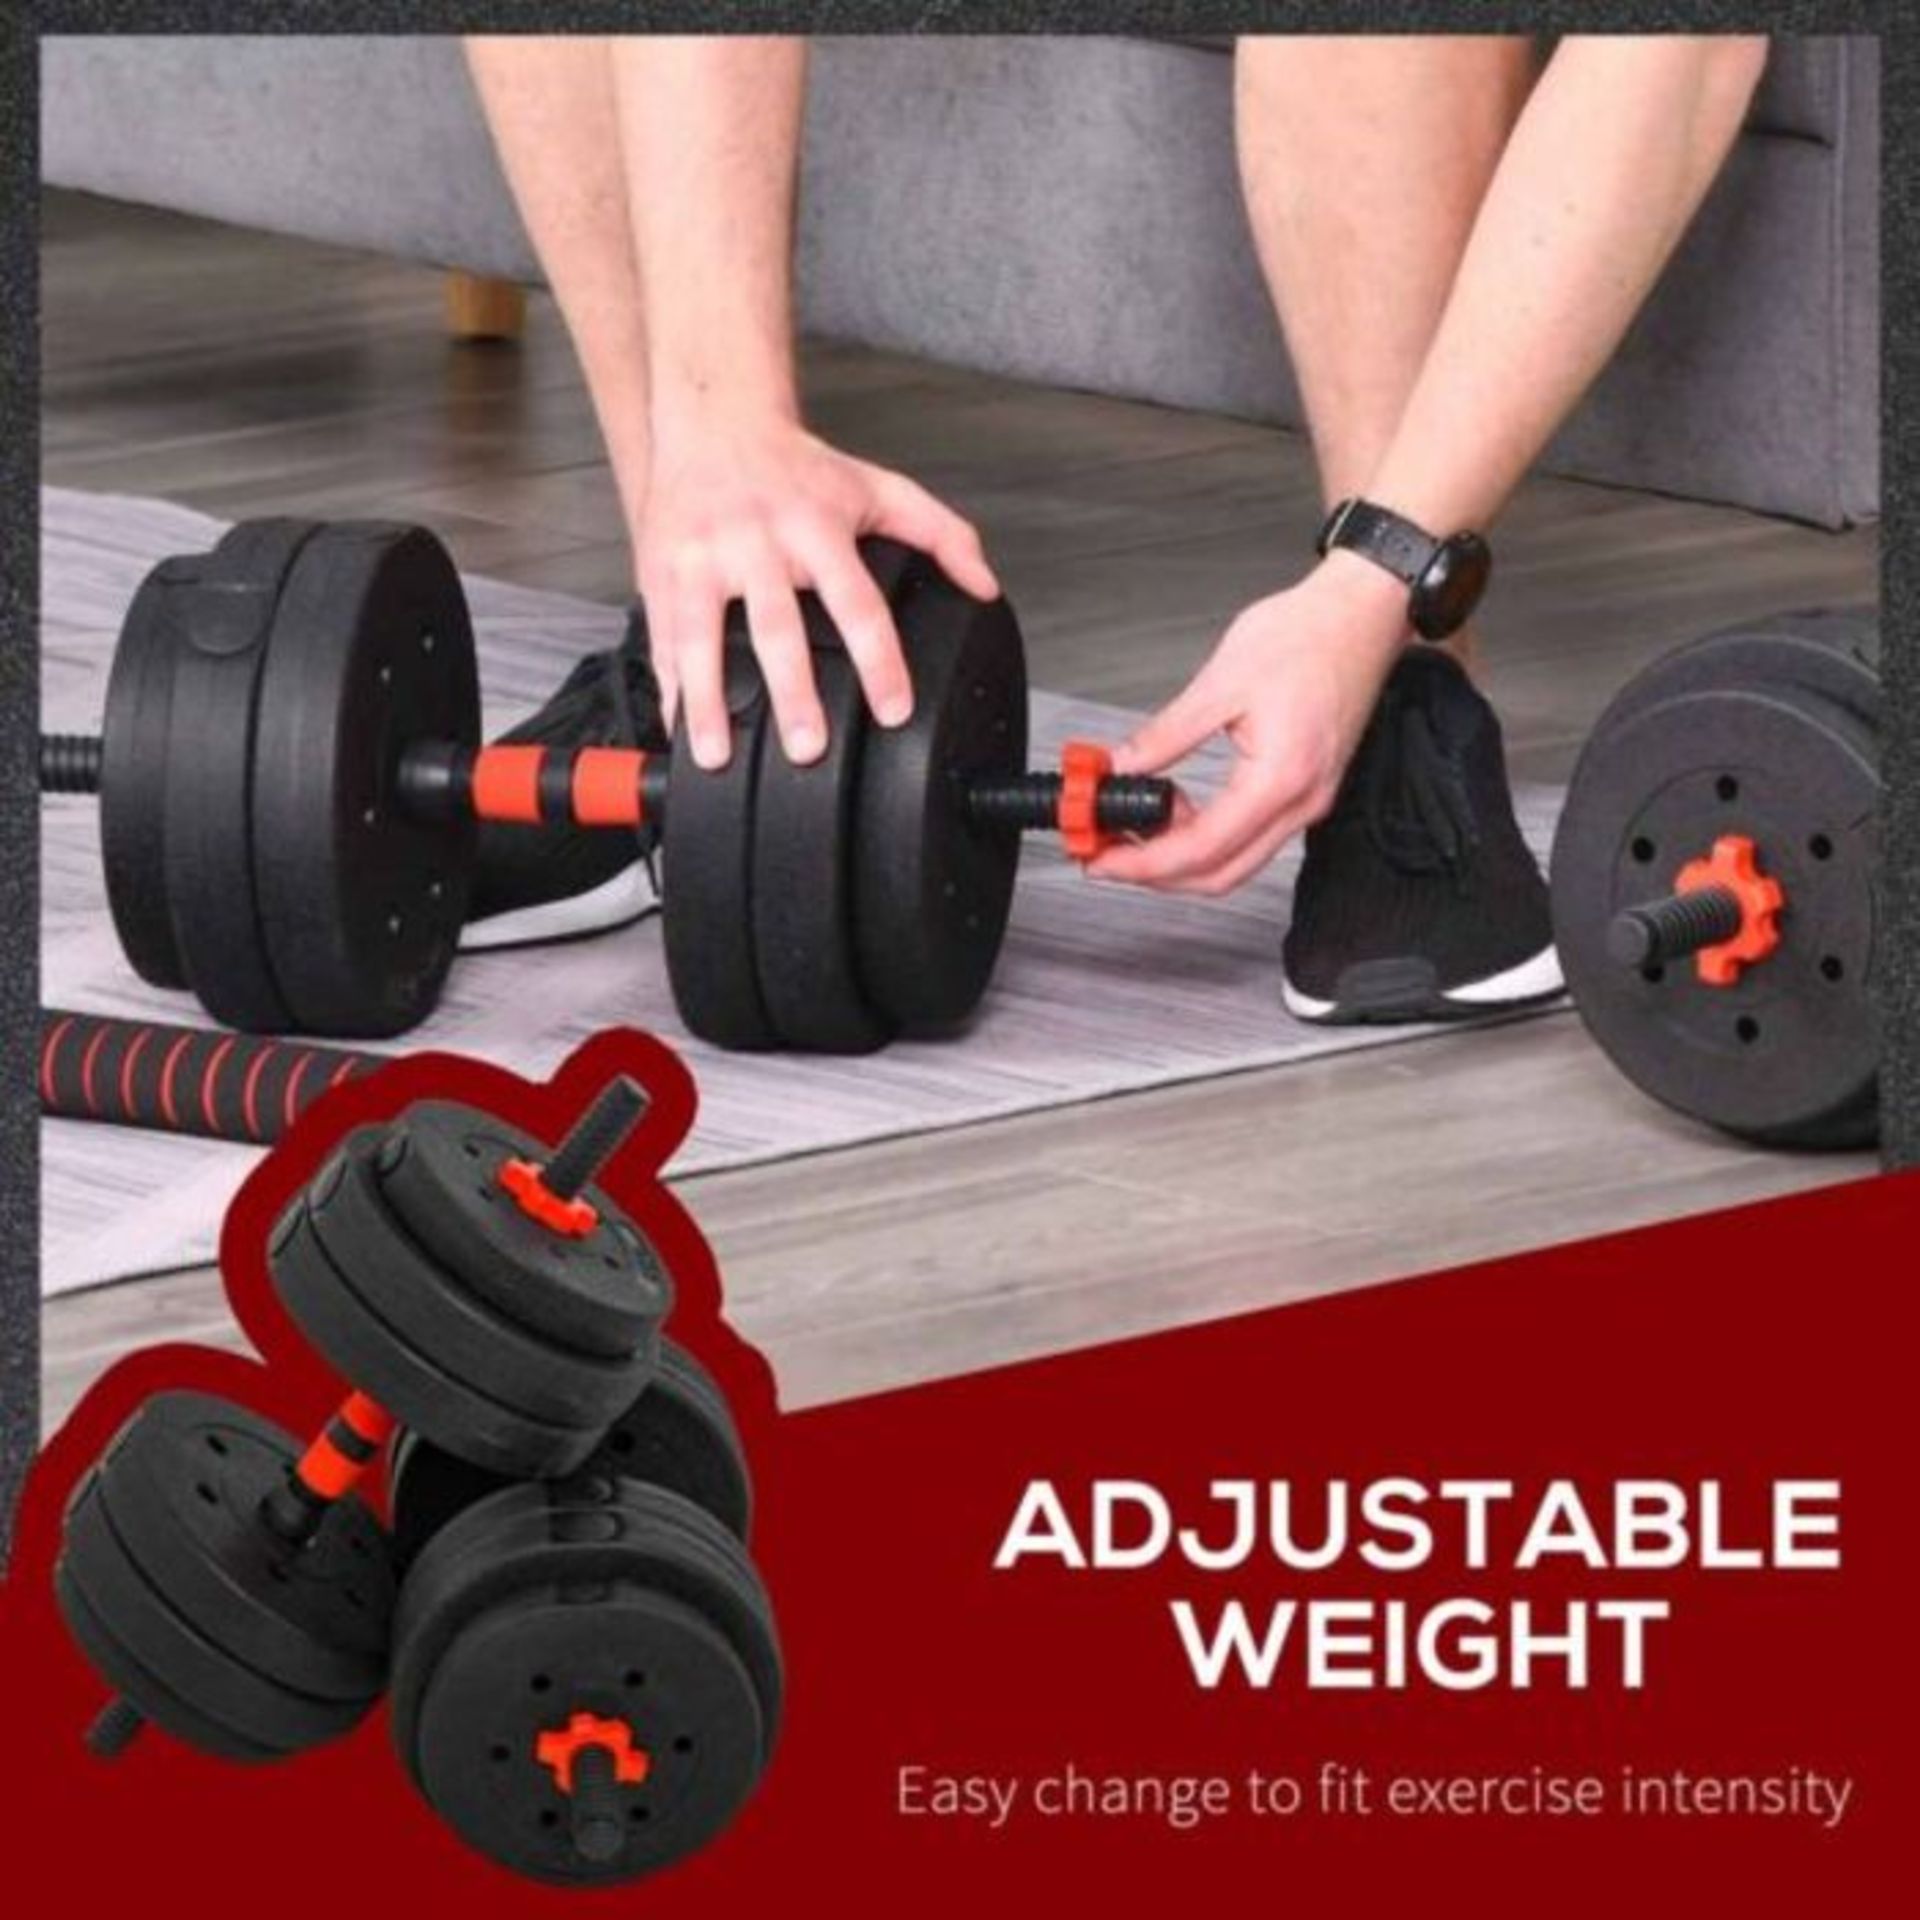 Hom Com 2 in1 Barbell/Dumb bell 20kg weight set, new and boxed, Similar sets retail at around œ40 - Image 2 of 4